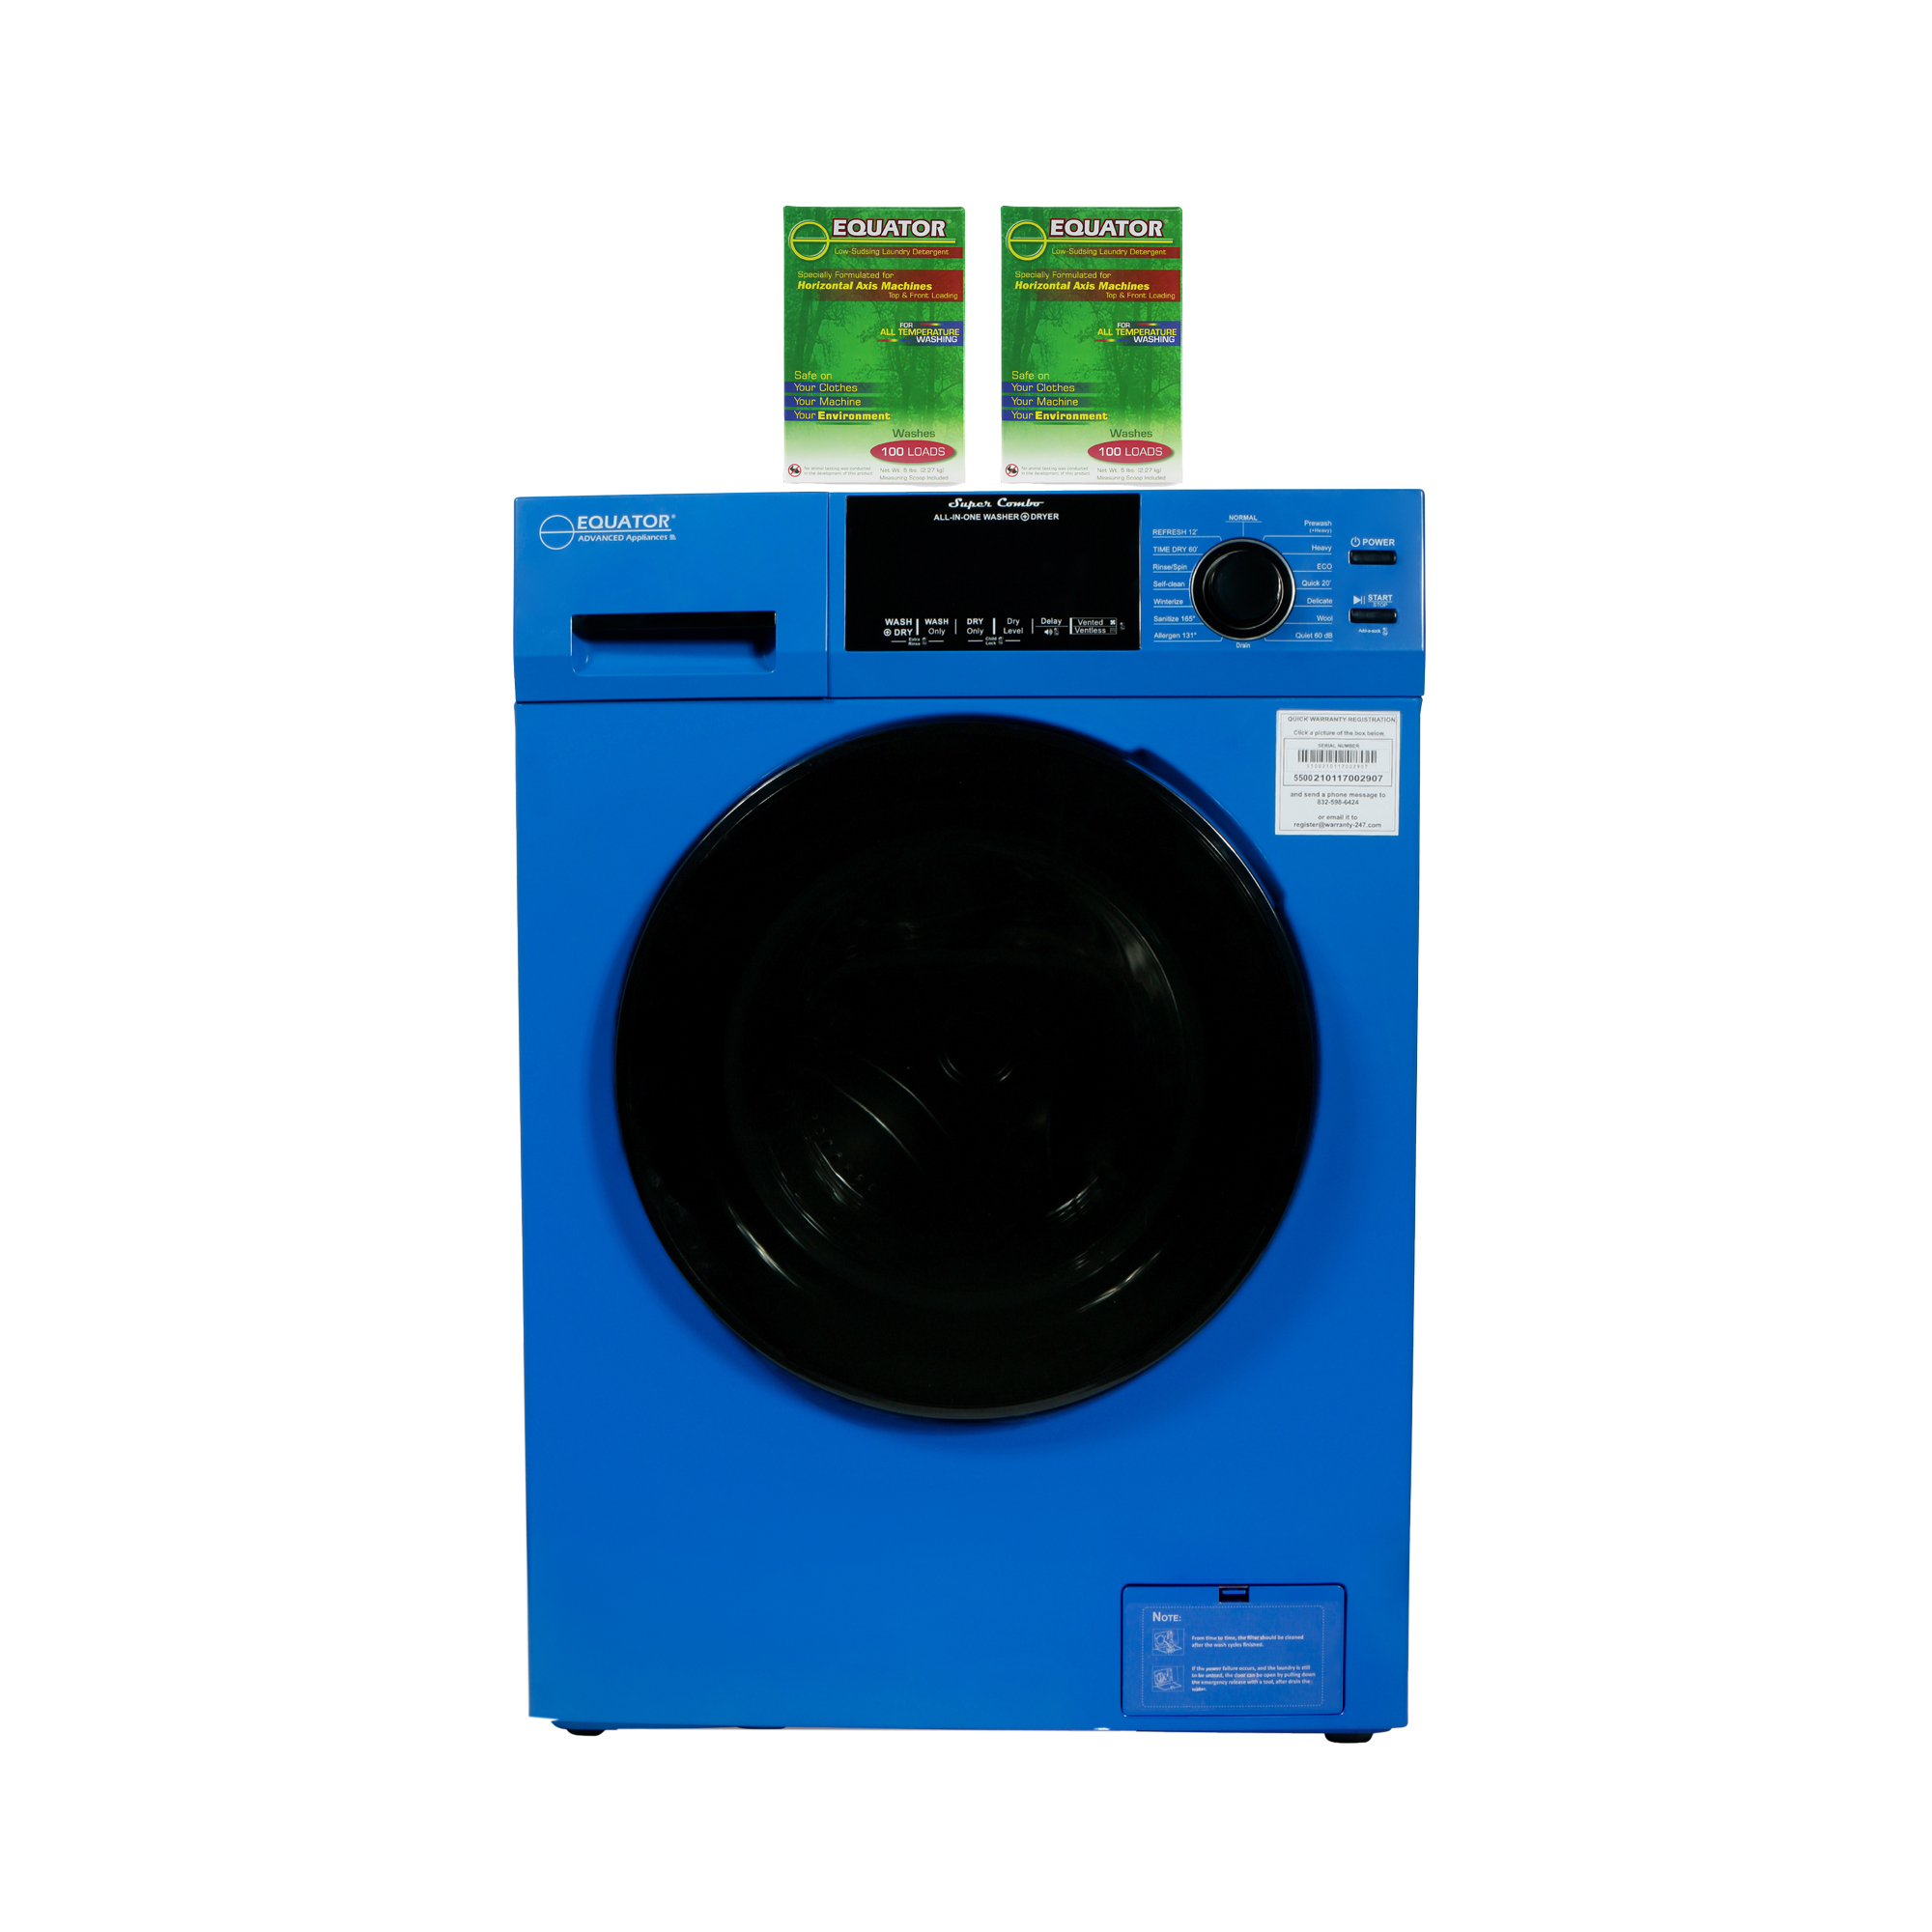 Equator Advanced Appliances EZ5500CVBlue2BoxesofHED 18lb. Combination Washer Dryer with 2 Boxes of HE Detergent - Blue